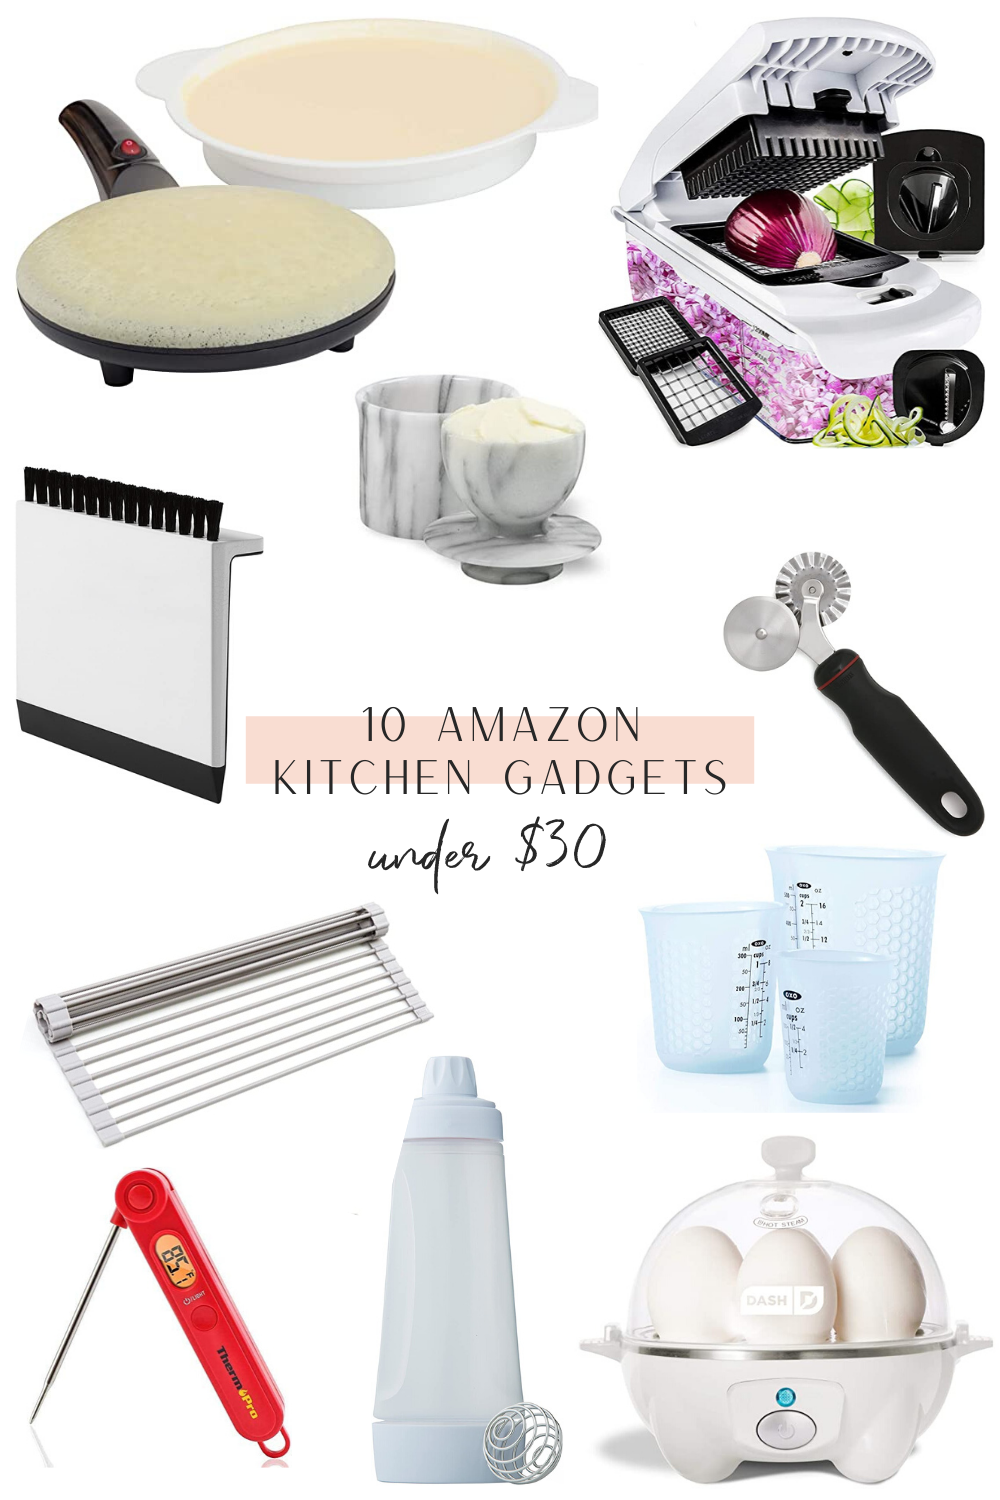 Own These 10 Awesome Kitchen Gadgets Under $10?